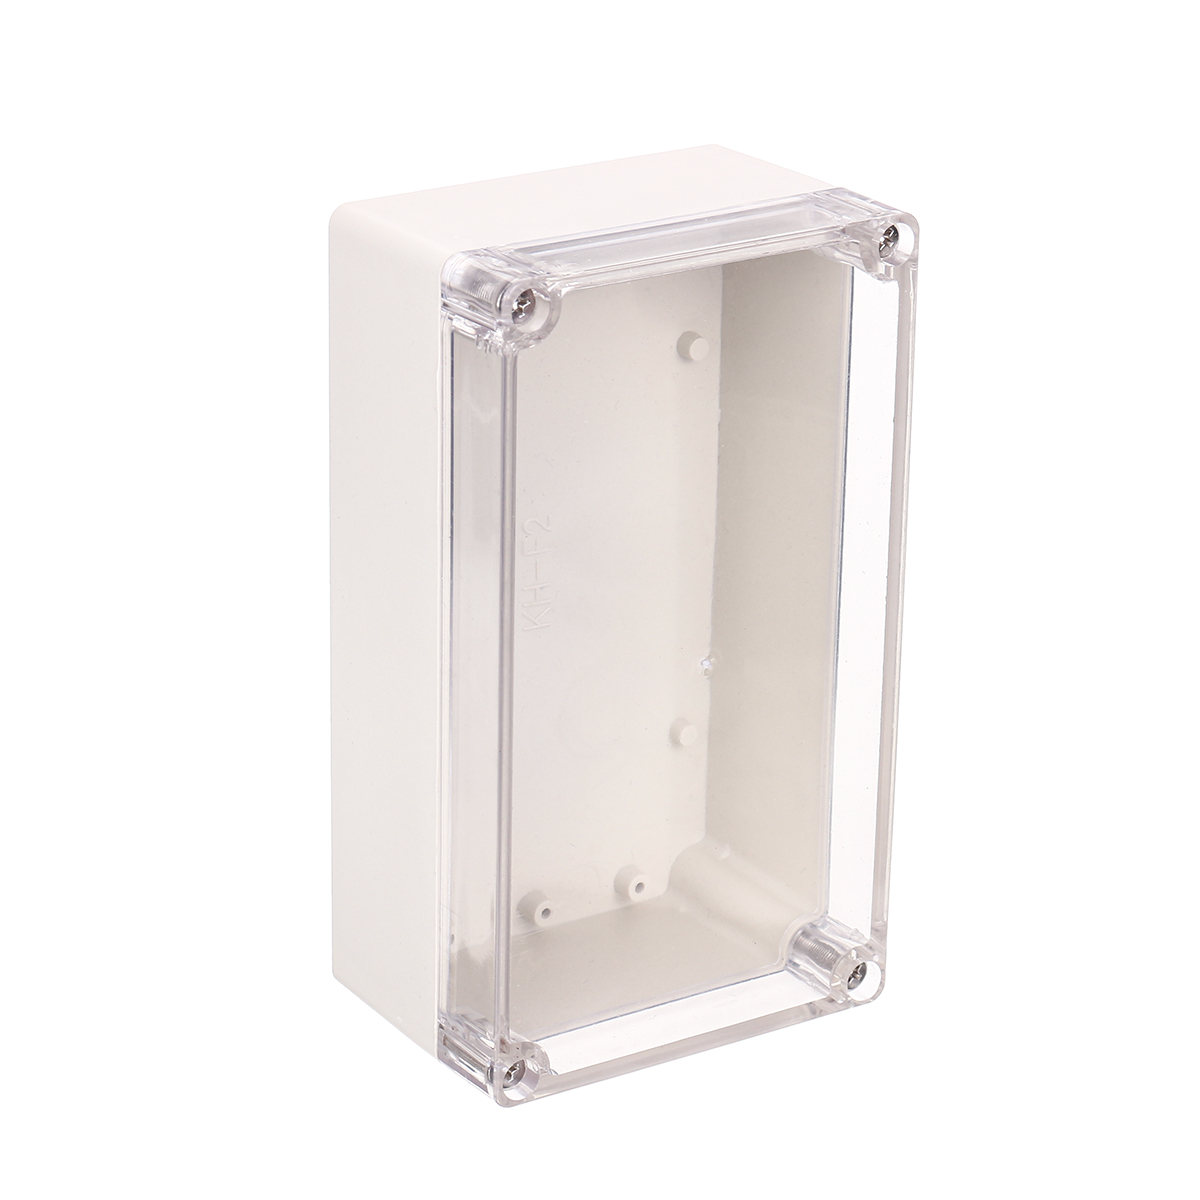 Plastic-Waterproof-Electronic-Project-Box-Clear-Cover-Electronic-Project-Case-1589060mm-1595735-6